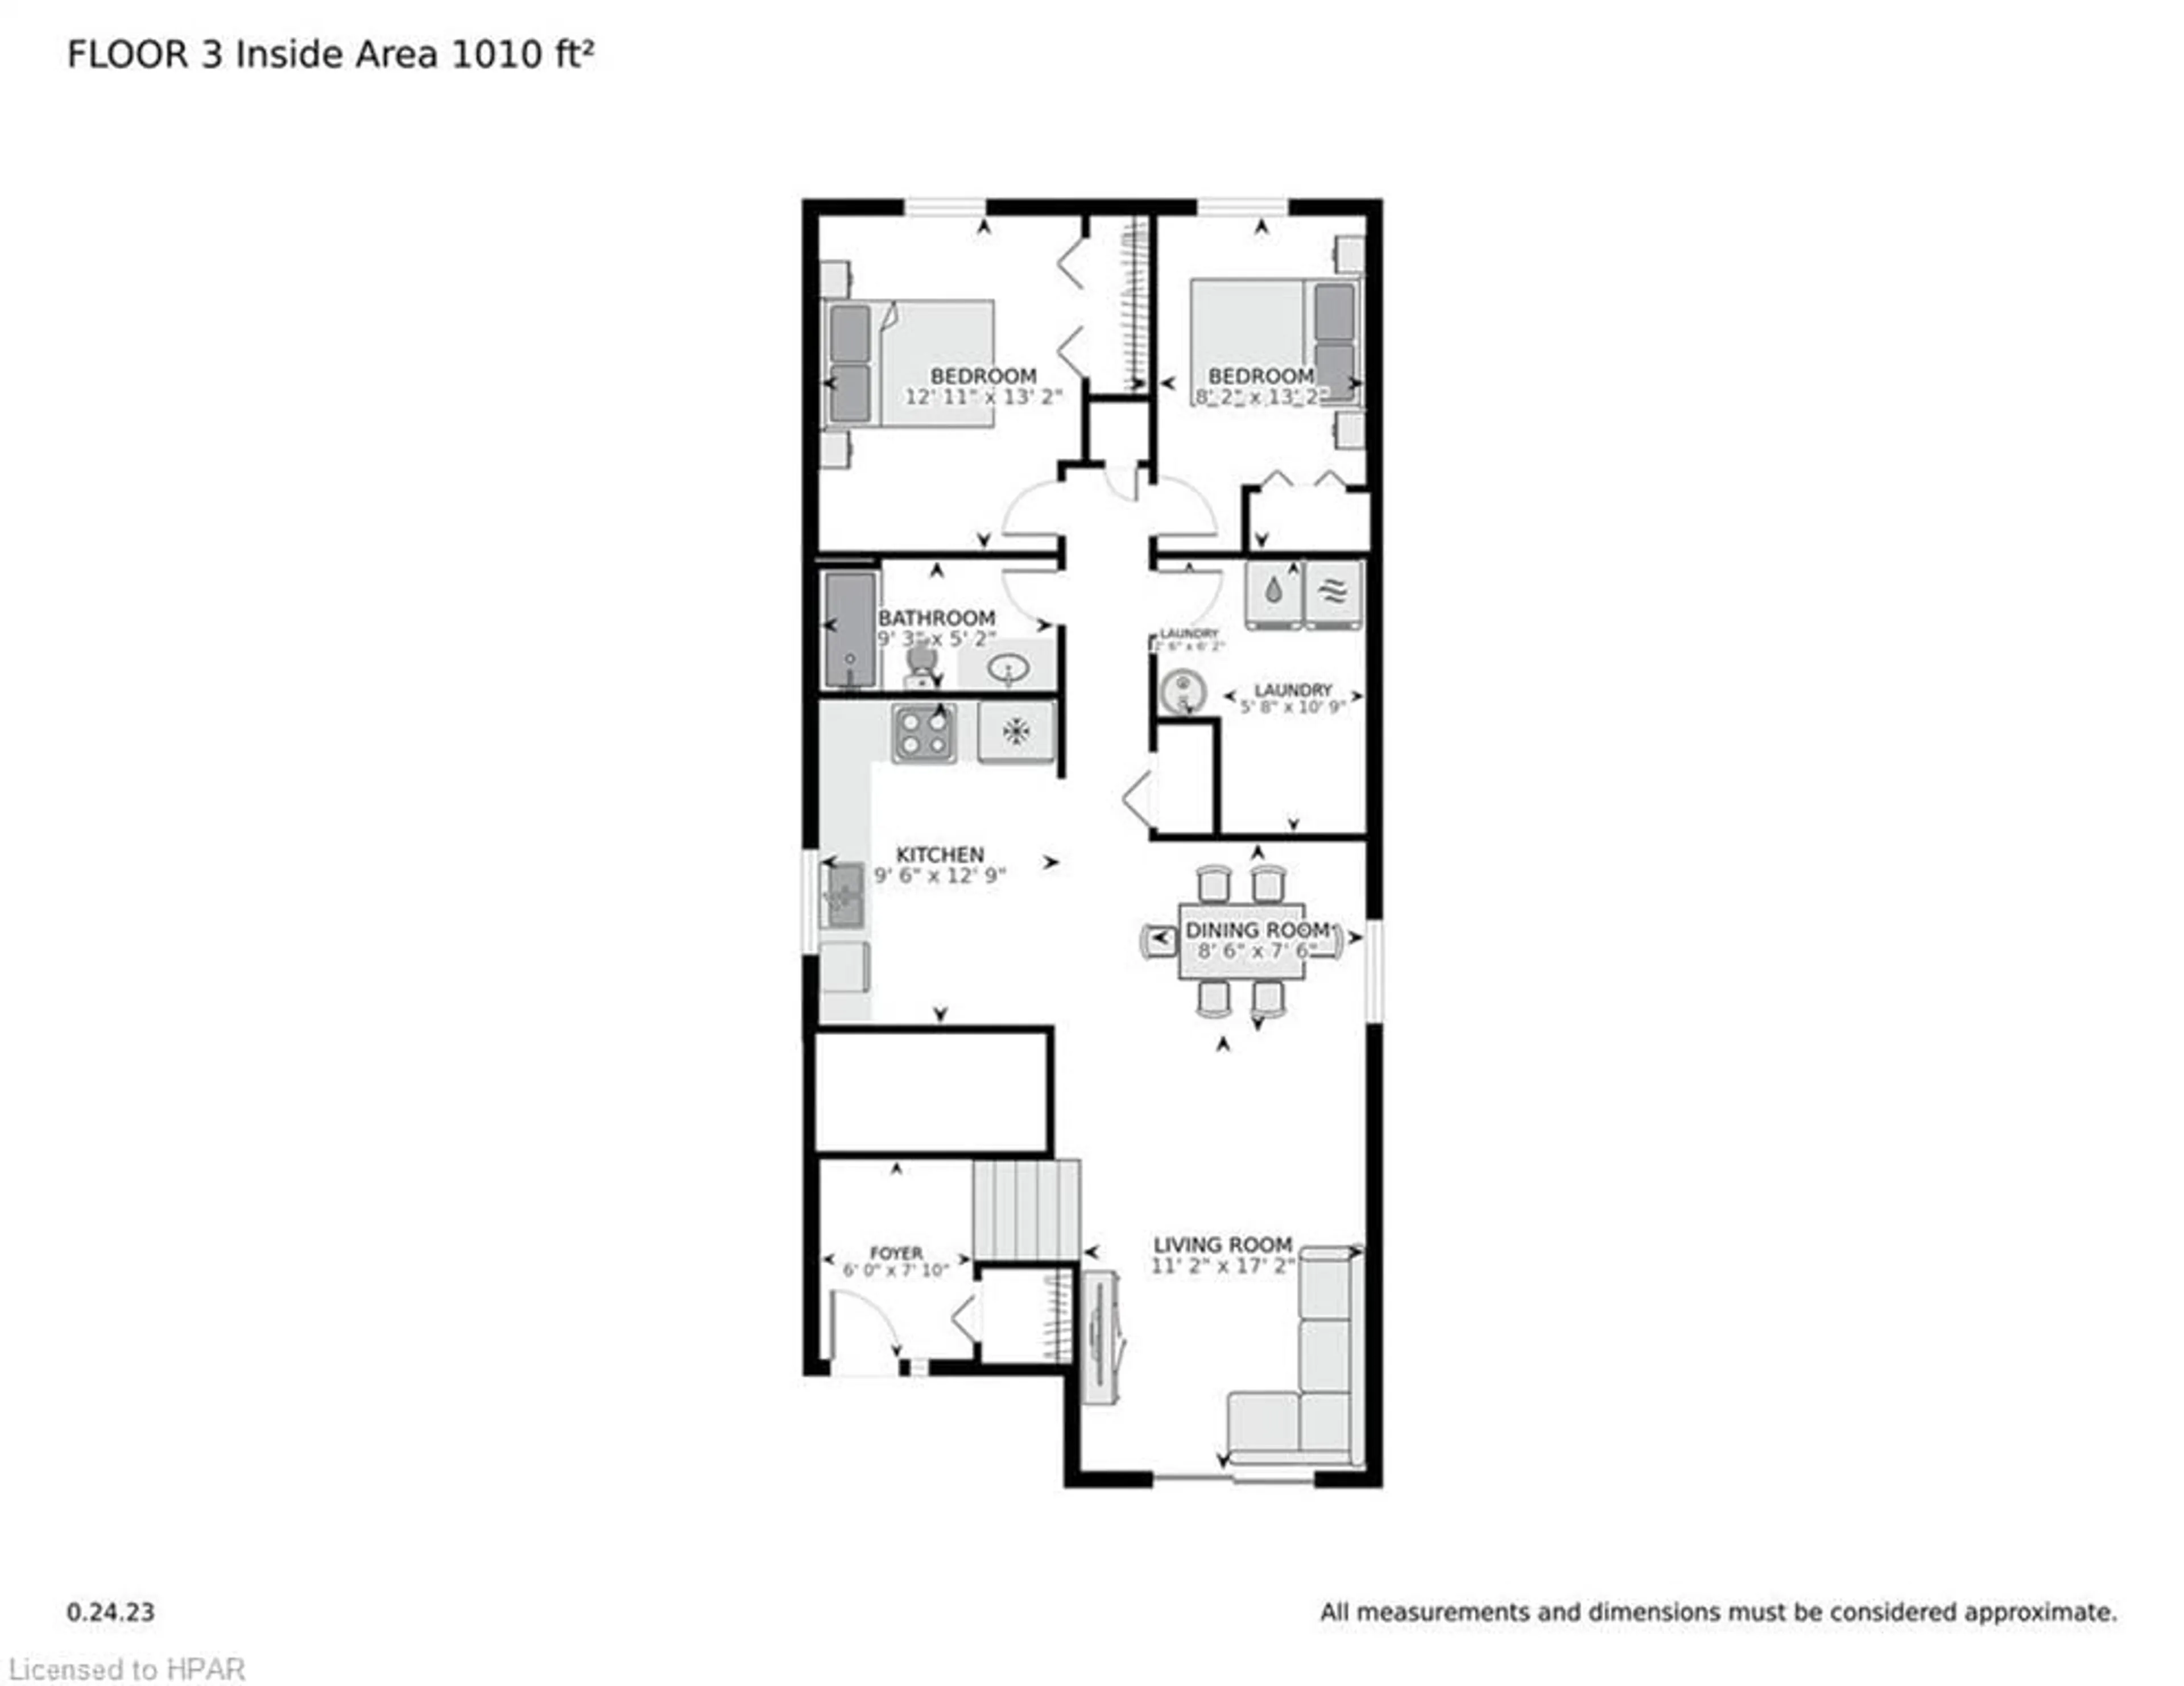 Floor plan for 17 Laurier St, Stratford Ontario N5A 4M2